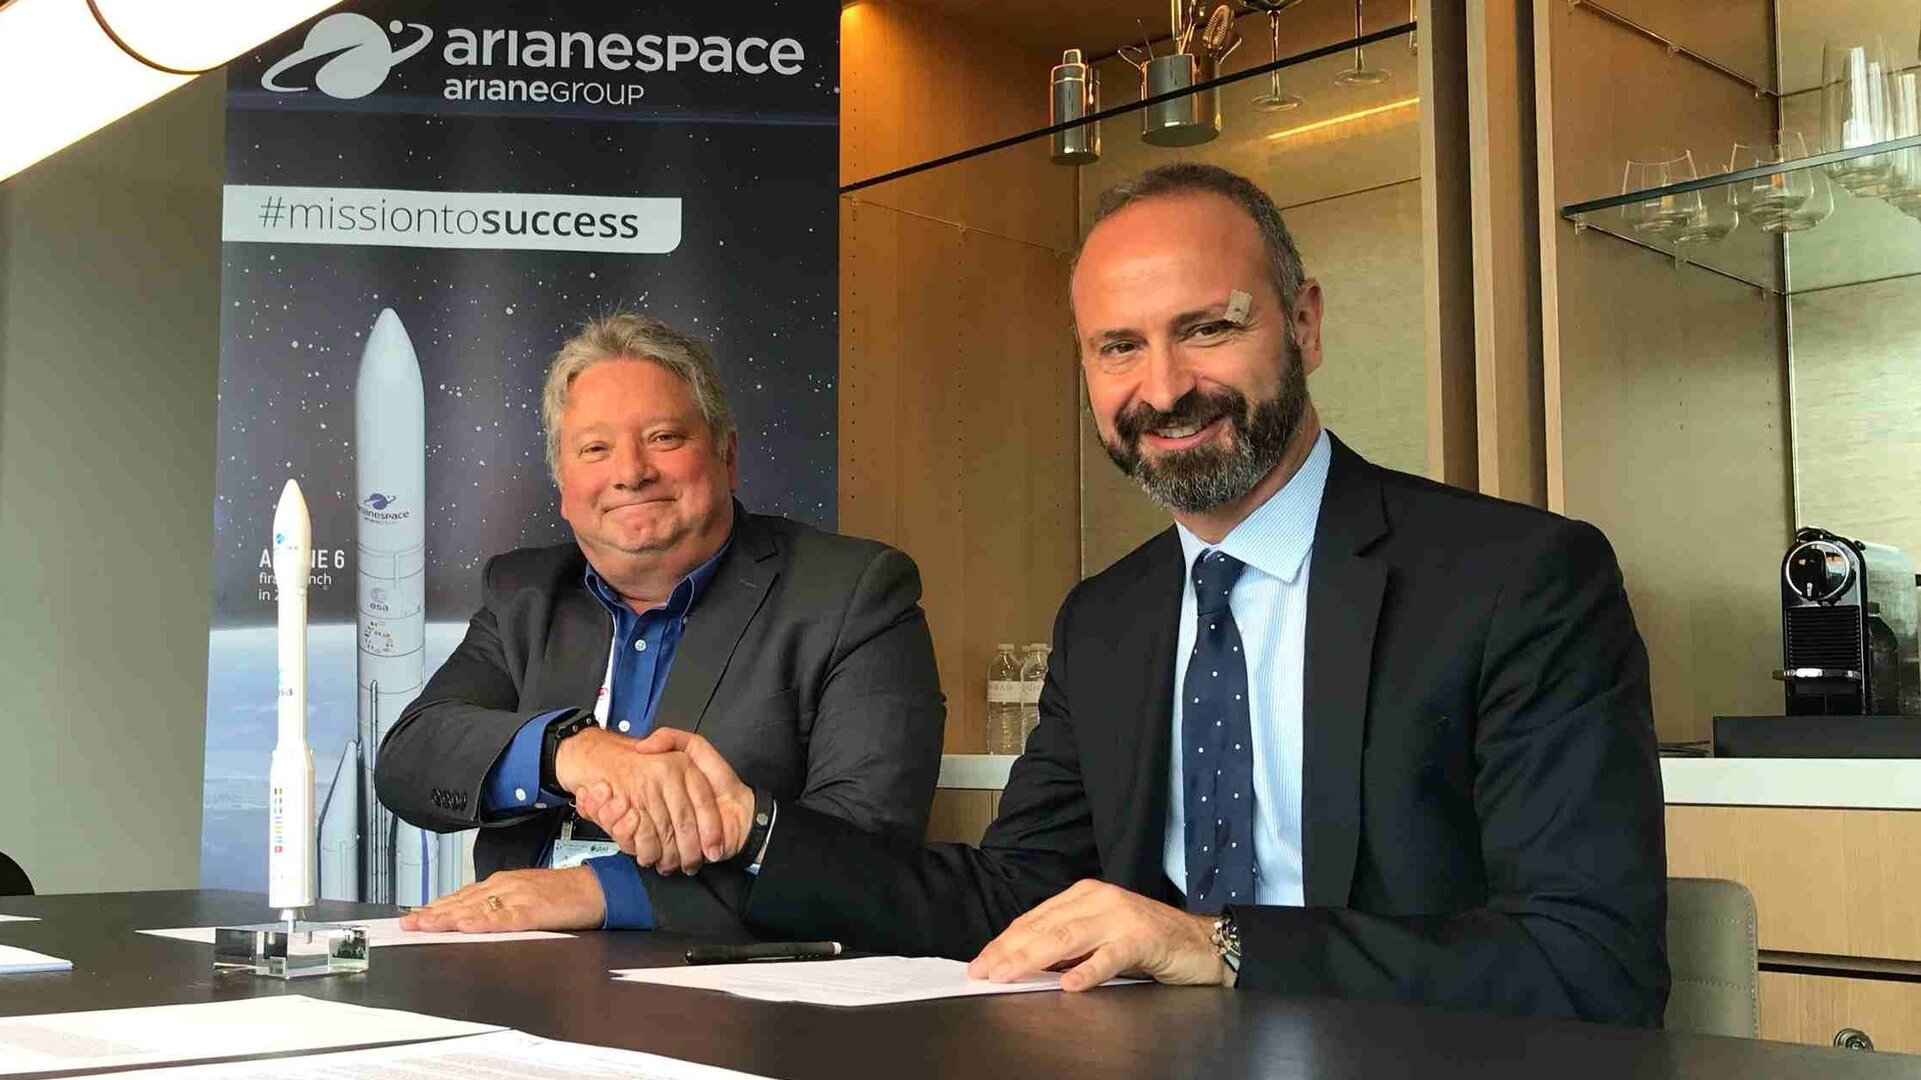 Peter Mabson of exactEarth (left) and Geoffroy Legros of Arianespace sign the launch contract for ESAIL